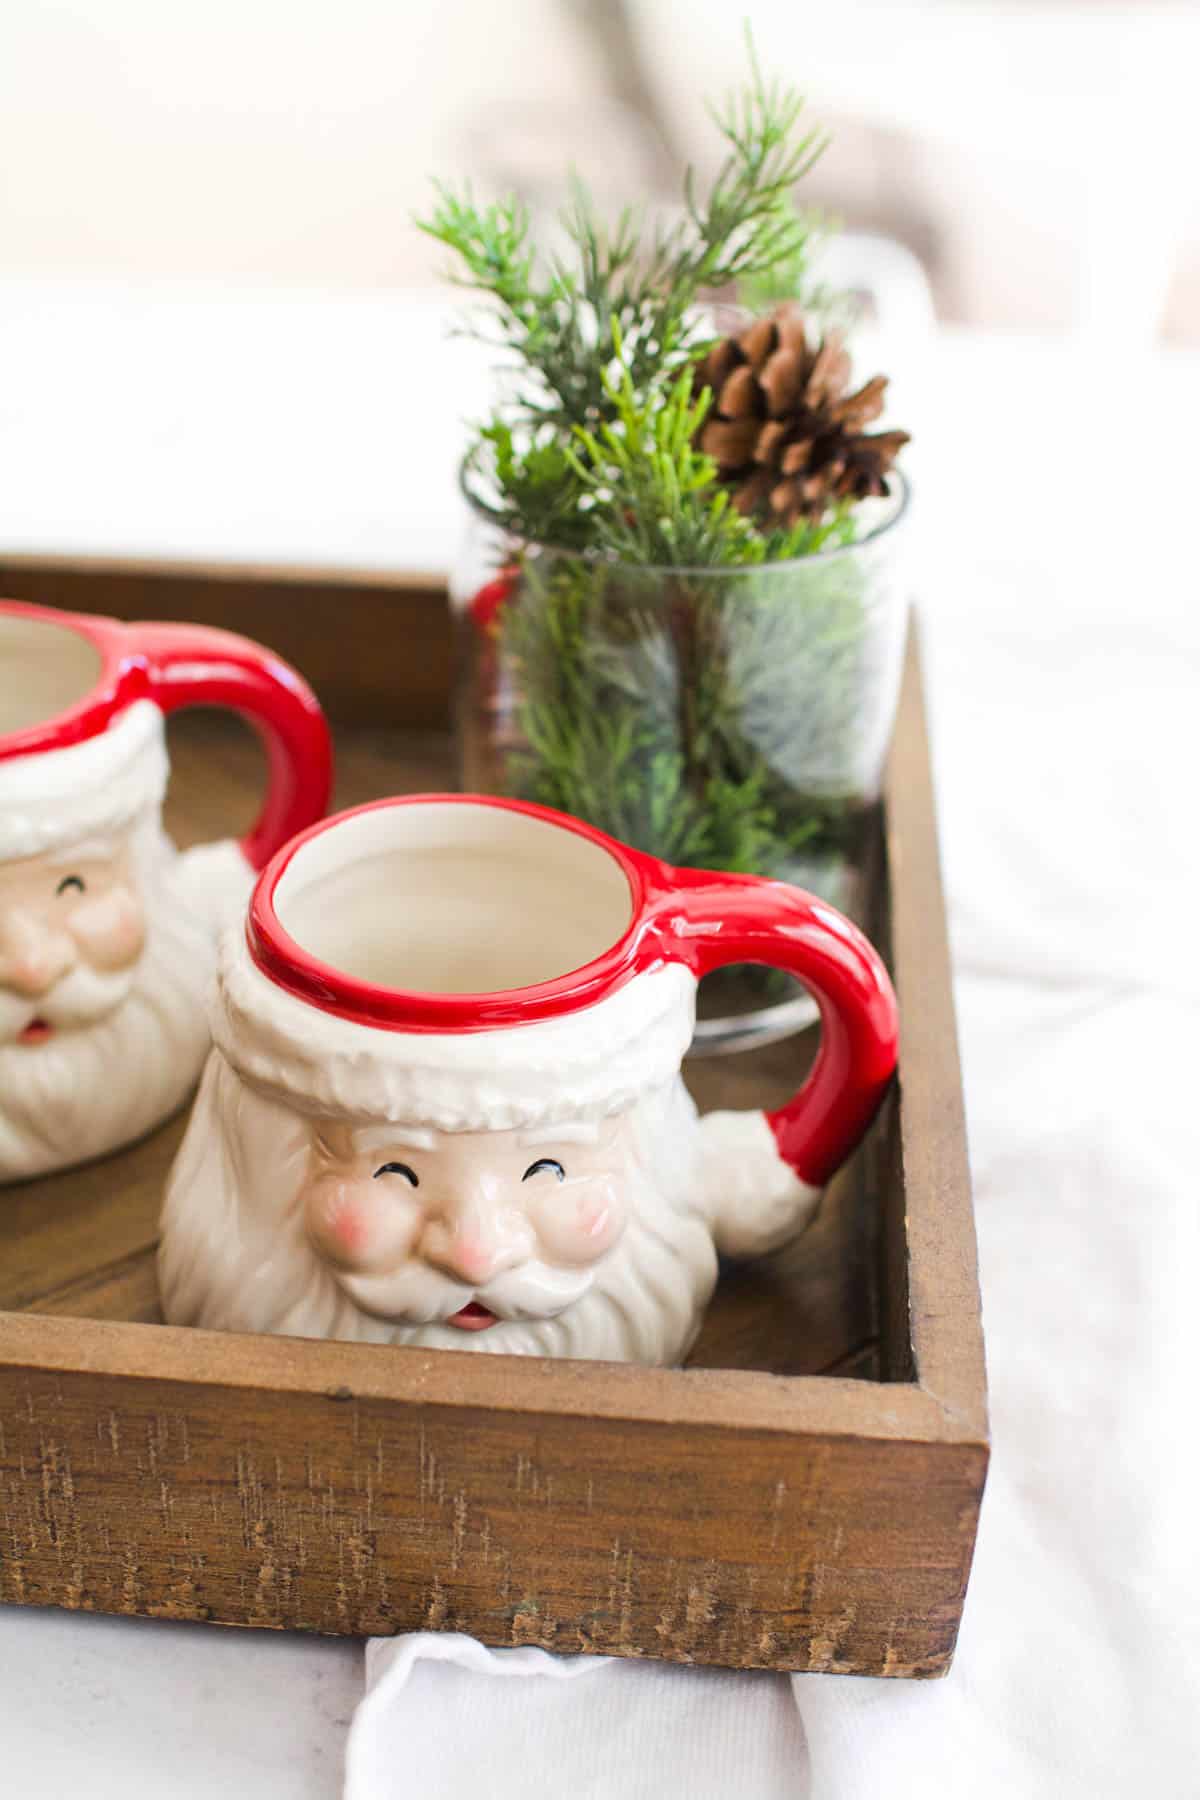 Tray on a table with two Santa Face mugs next to some holiday greenery.